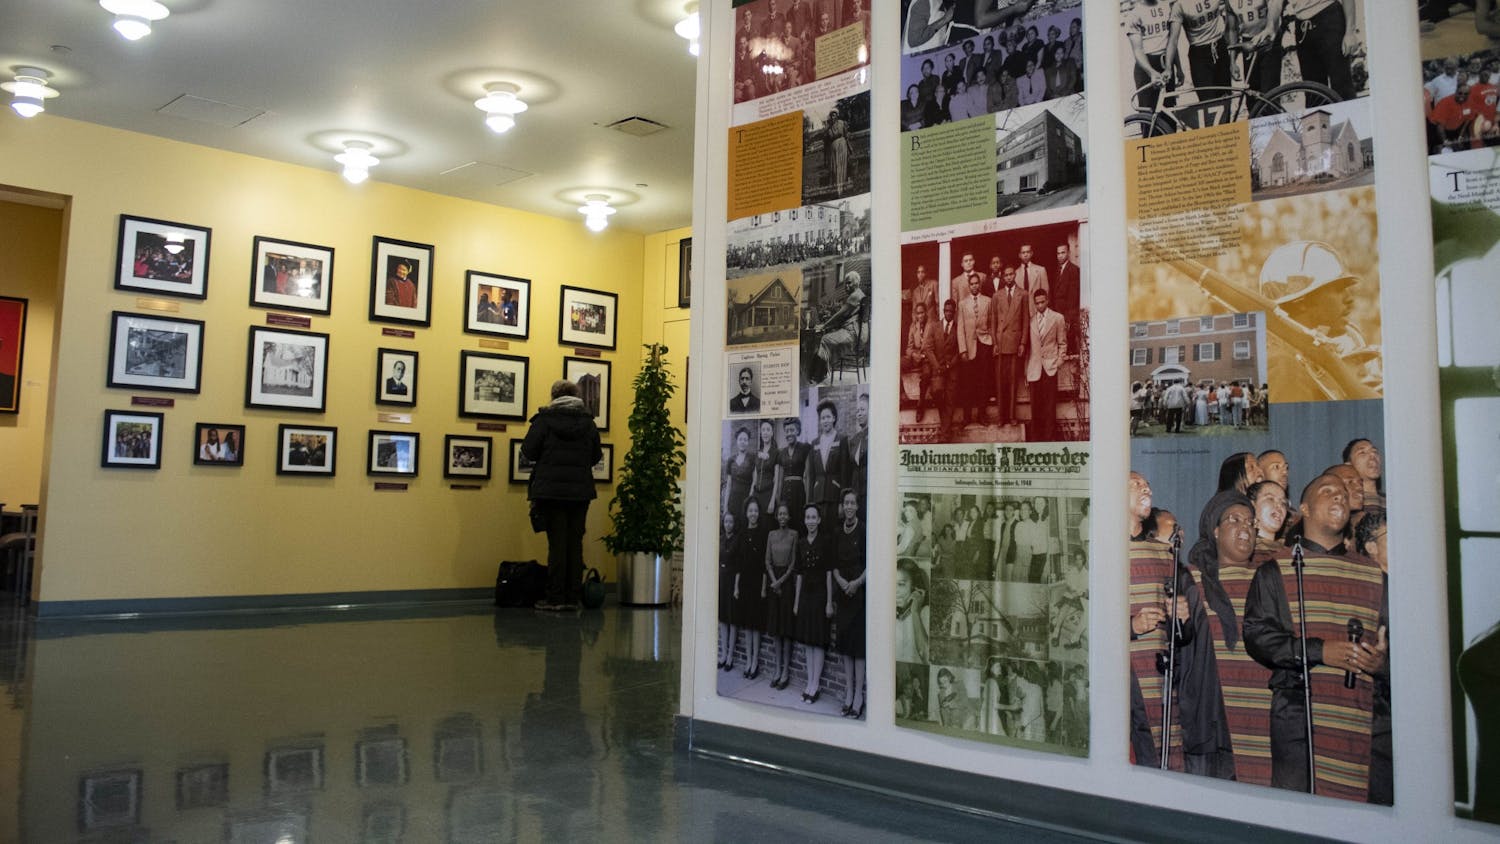 Students walk by the photographs on the walls Jan. 29, 2019, in the lobby of the Neal-Marshall Black Culture Center. The culture center will present the annual Umoja celebration virtually from Sunday to Friday.